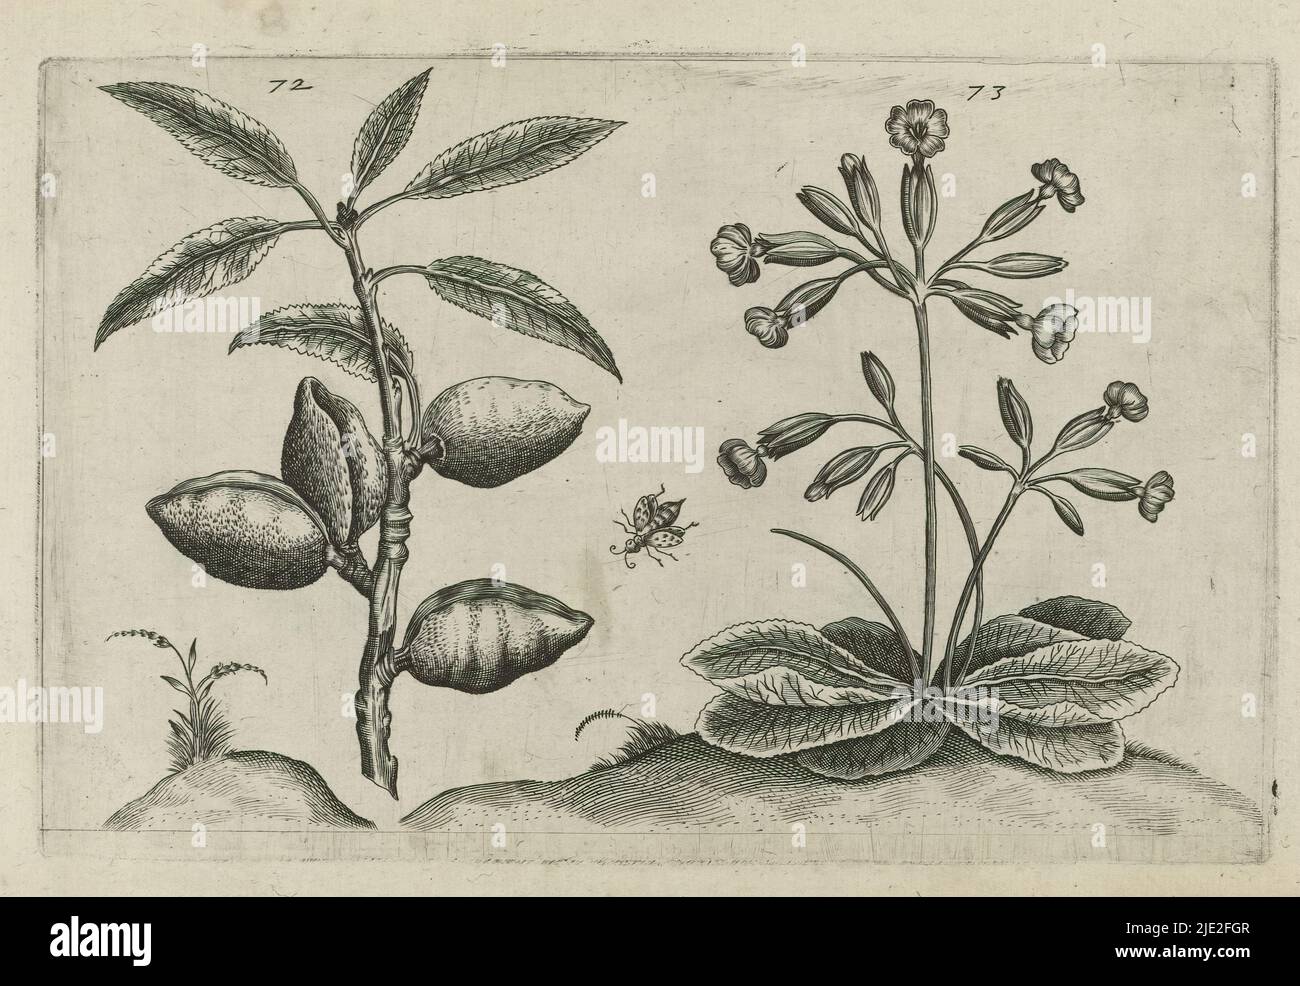 Almond tree and golden primrose, Cognoscite lilia (series title), Almond tree (Prunus dulcis) and golden primrose (Primula veris), numbered 72 and 73. in the middle a fly., print maker: Crispijn van de Passe (I), (attributed to), after drawing by: Crispijn van de Passe (I), (attributed to), publisher: Crispijn van de Passe (I), print maker: Cologne, after drawing by: Cologne, publisher: Cologne, publisher: London, 1600 - 1604, paper, engraving, height 127 mm × width 205 mm, height 172 mm × width 272 mm Stock Photo